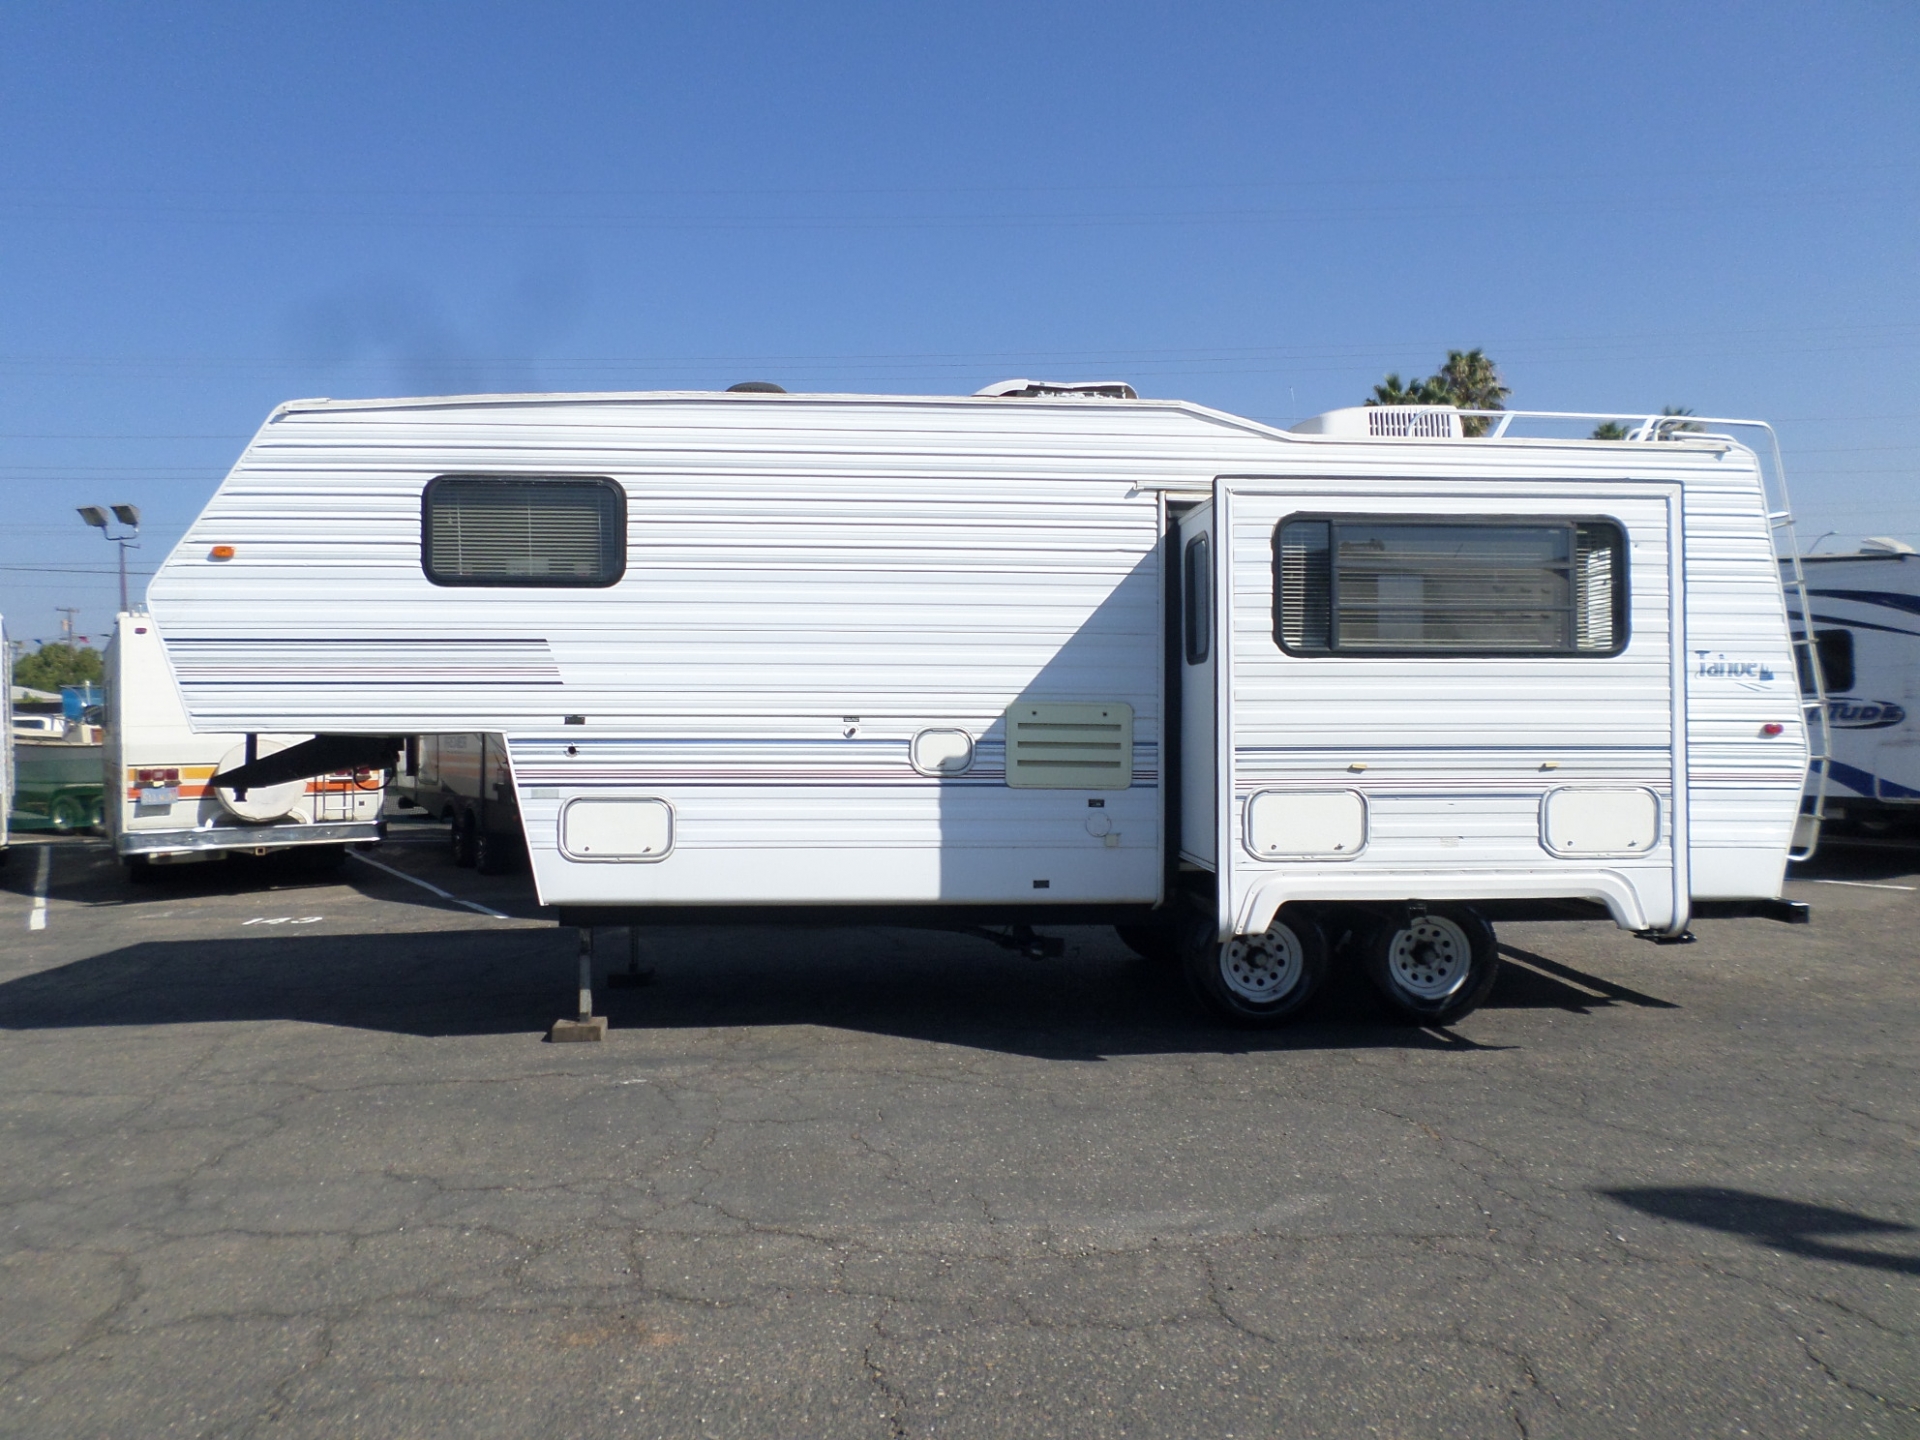 RV for sale: 2004 Tahoe 18 DT in Lodi Stockton CA - Lodi Park and Sell